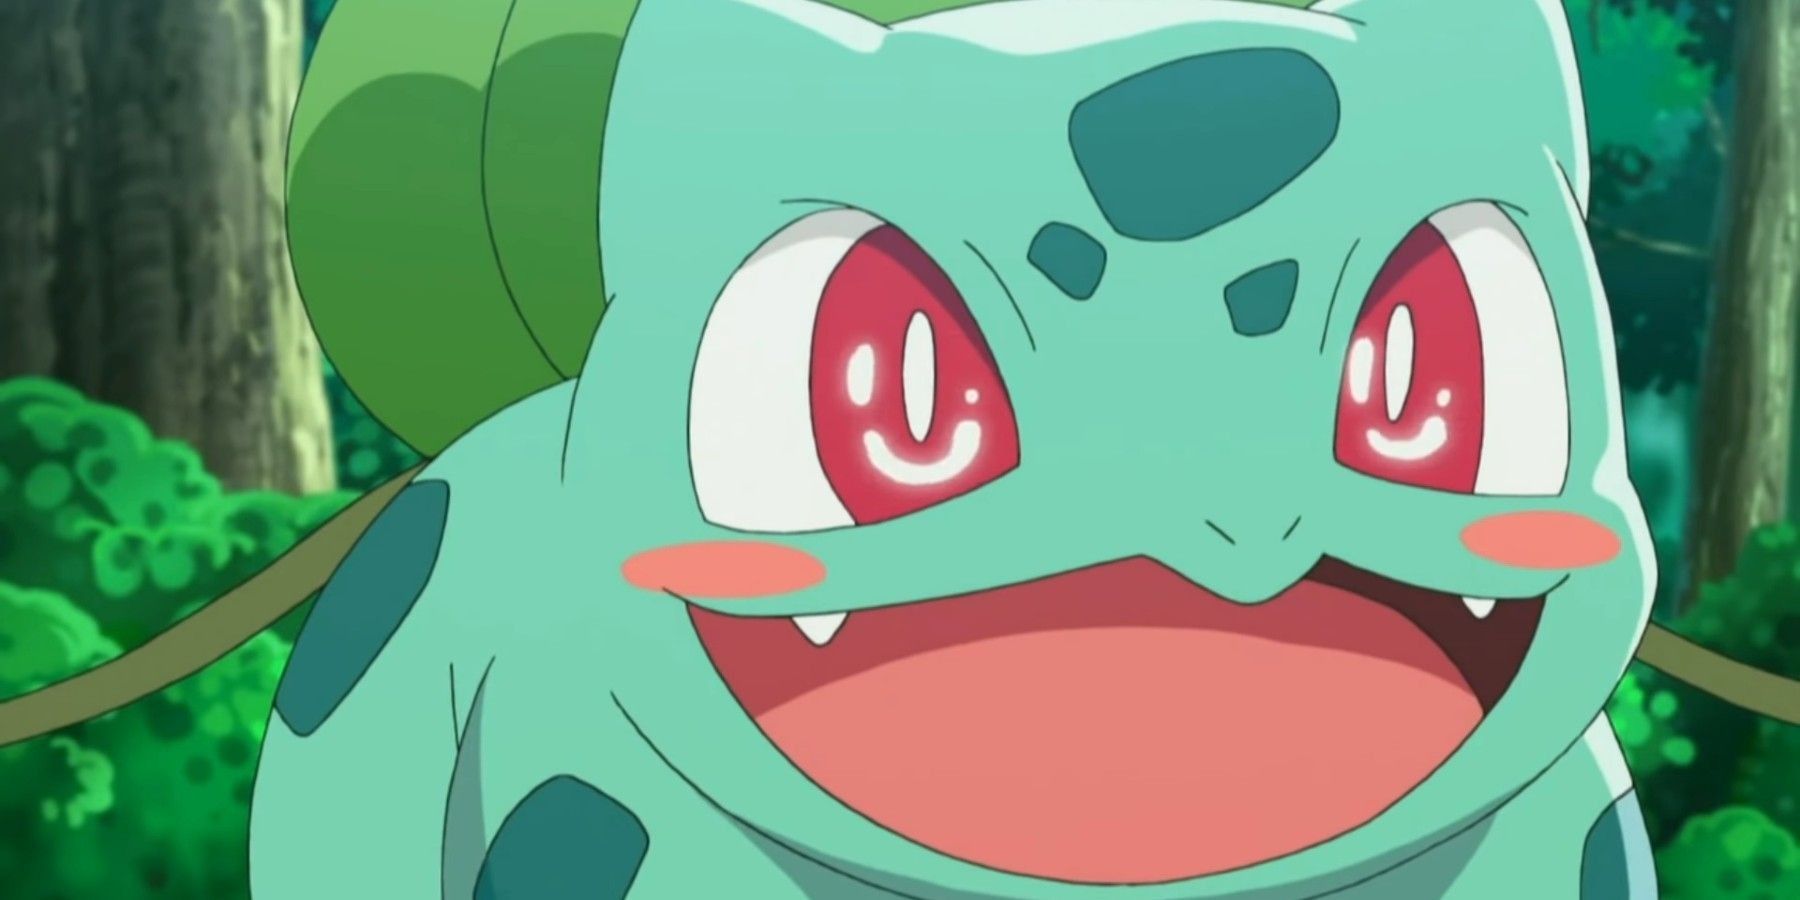 Pokemon Fan Uses Etch-A-Sketch to Draw Bulbasaur and Its Evolutions